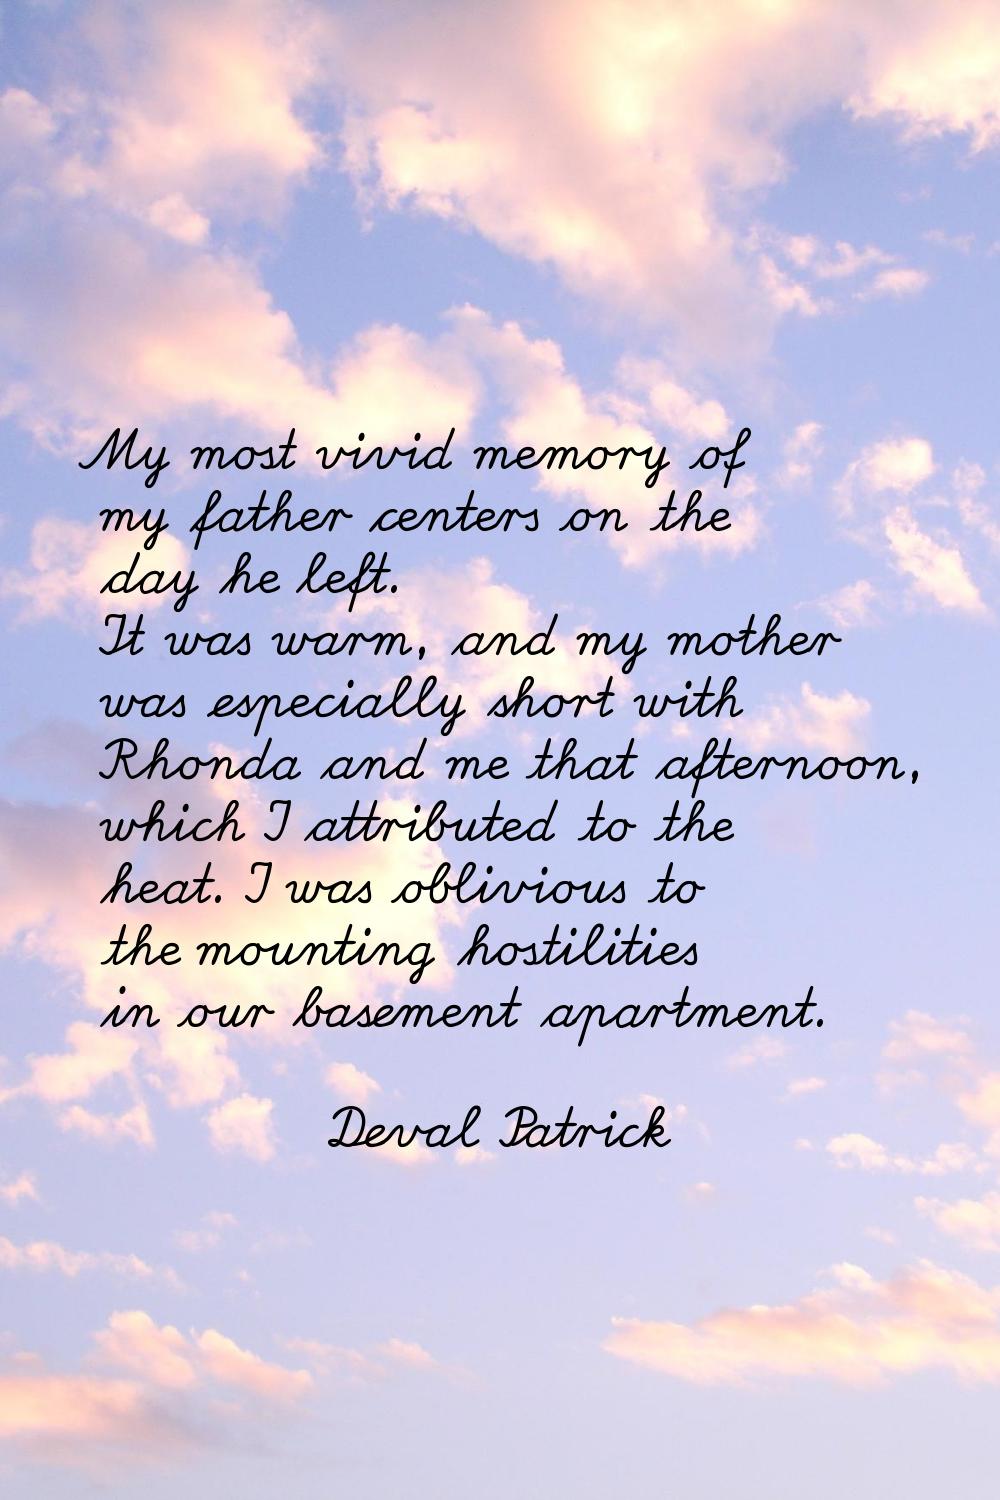 My most vivid memory of my father centers on the day he left. It was warm, and my mother was especi